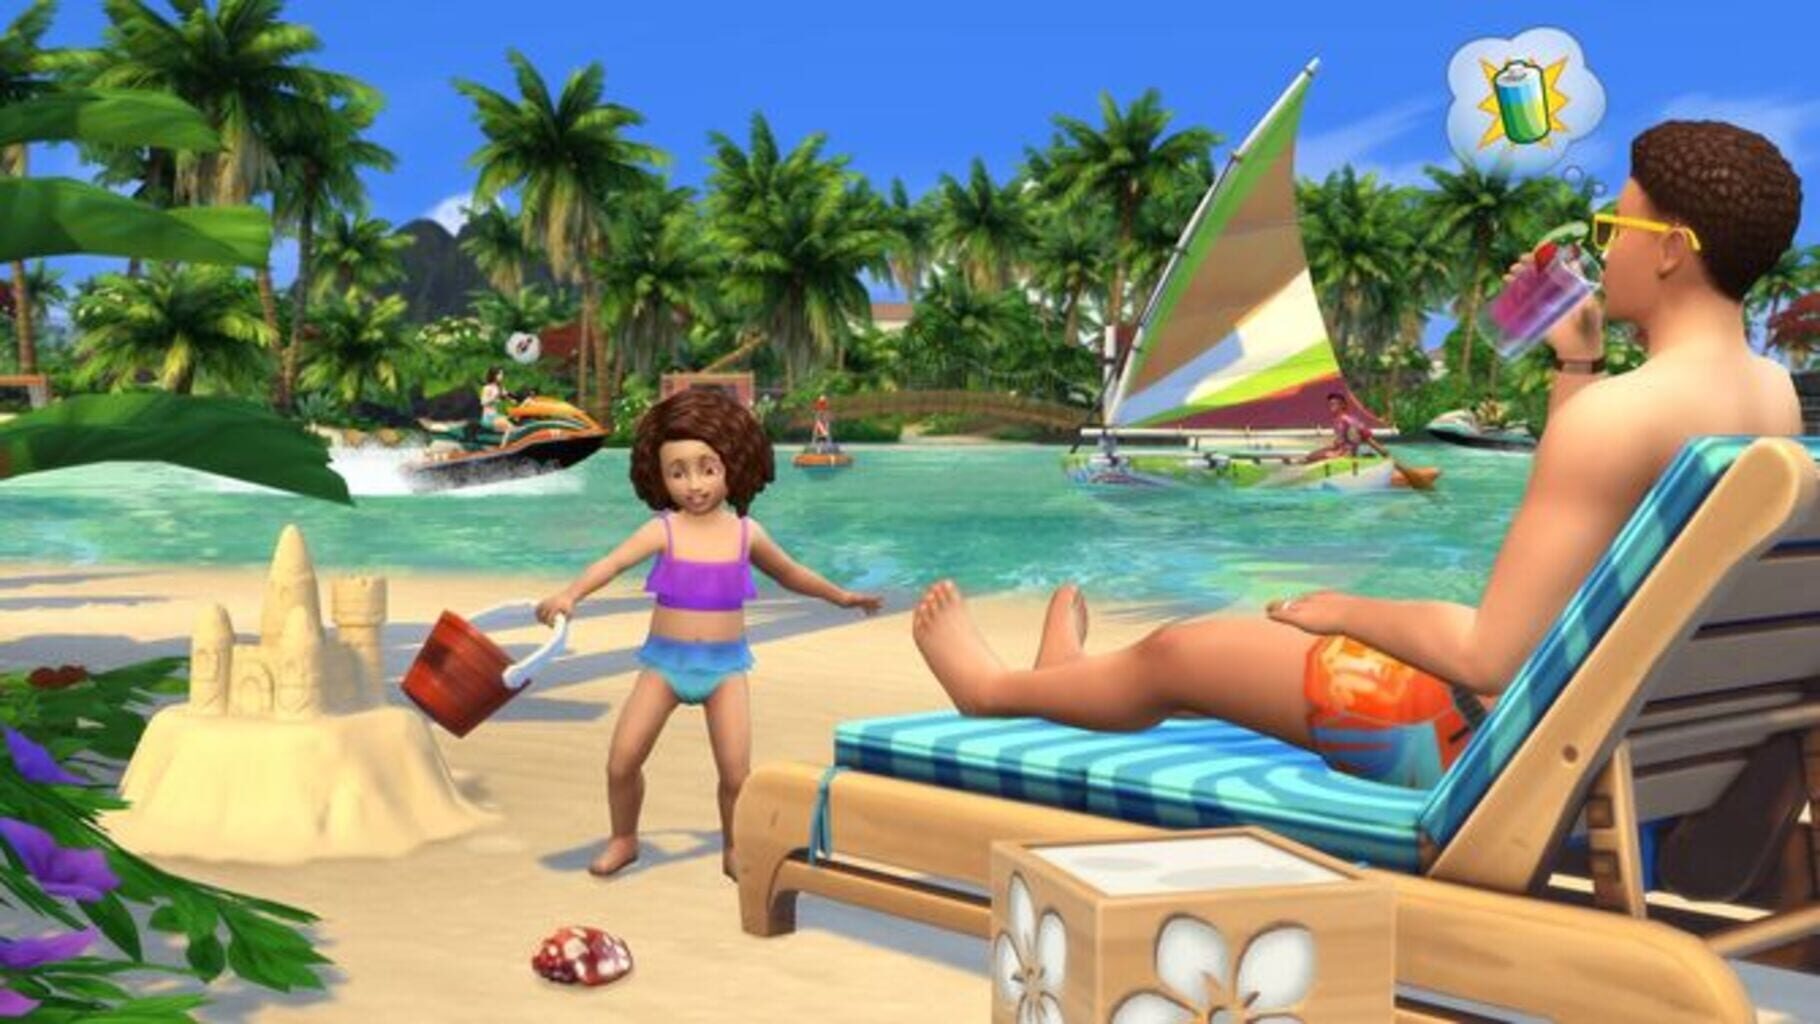 The Sims 4: Island Living Image